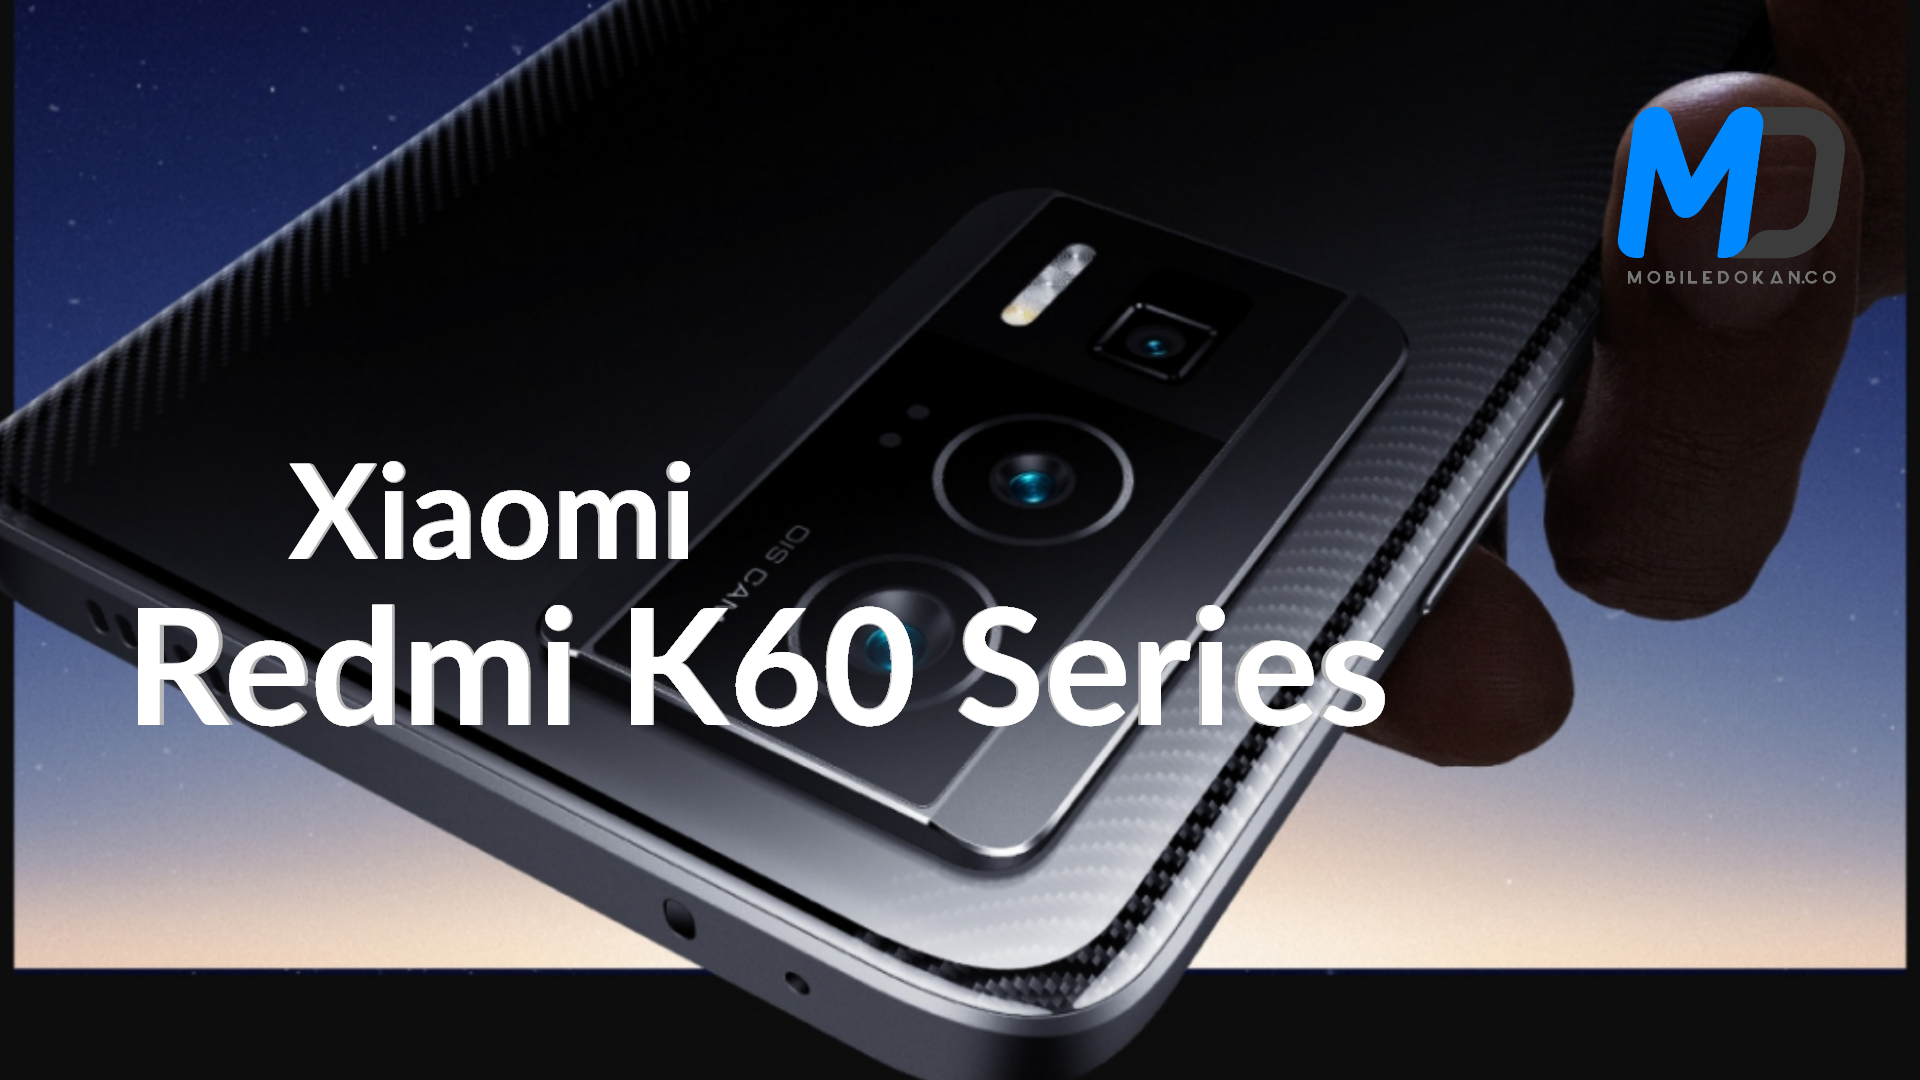 Xiaomi Redmi K60 series expects to launch on December 27